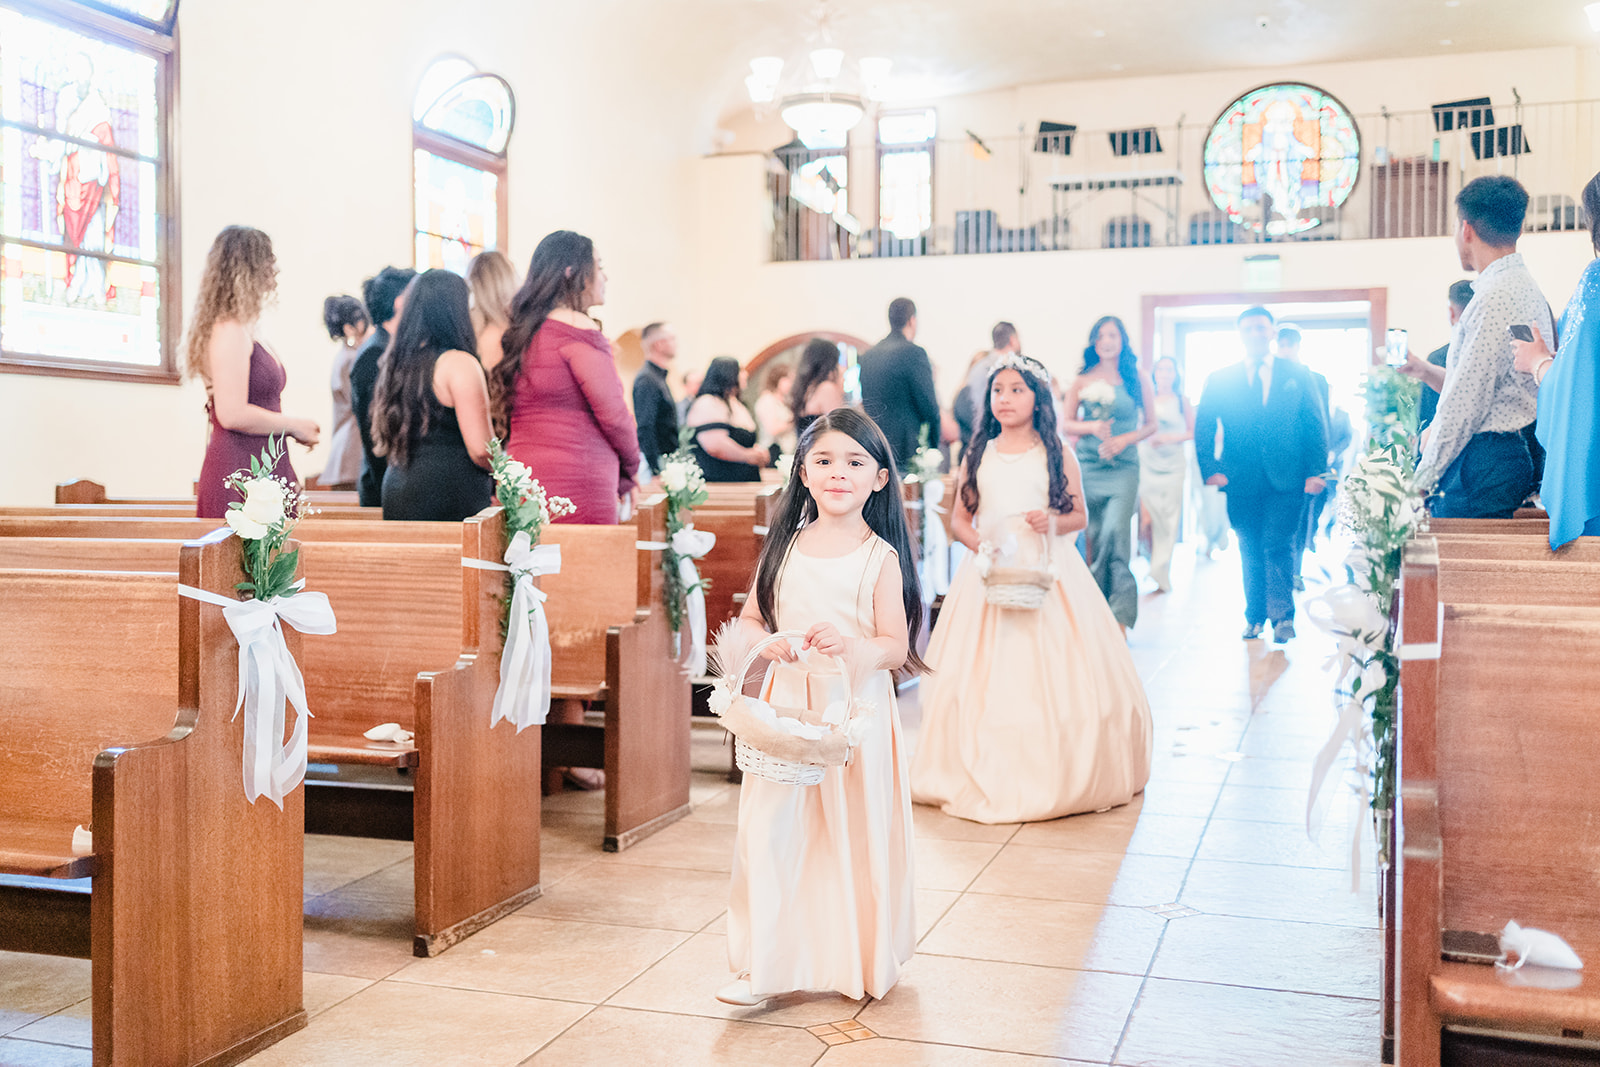 Breathtaking church ceremony capturing the essence of Nallely and Ansony's wedding, showcasing the couple's joy and the 